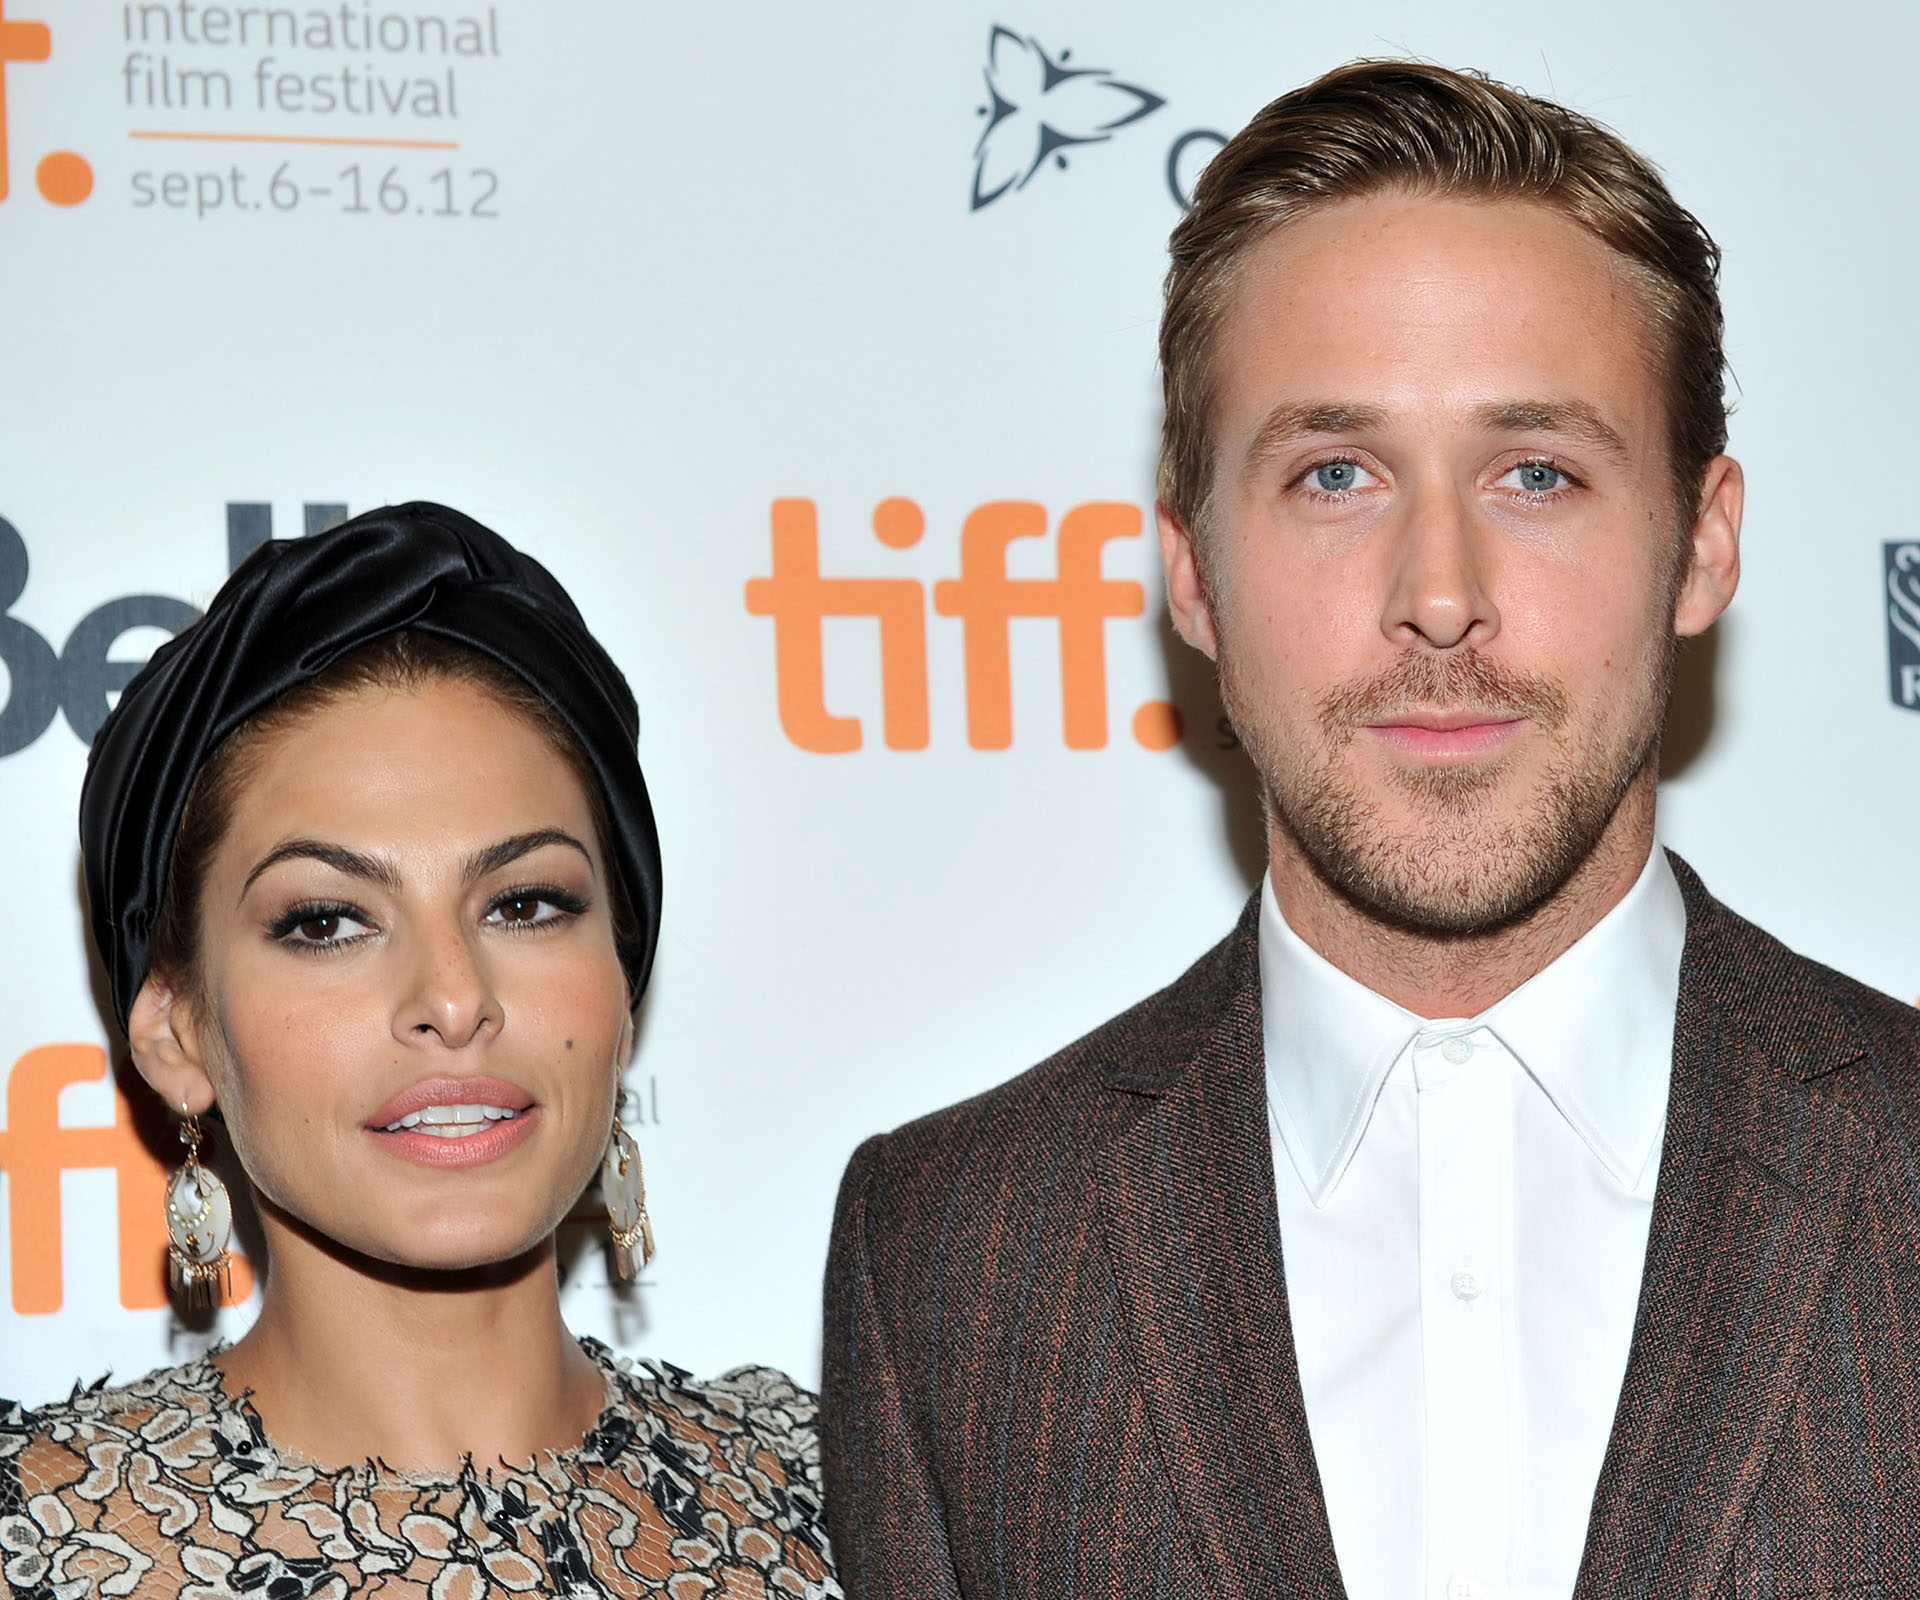 Are Ryan Gosling and Eva Mendes gifting the world with another child